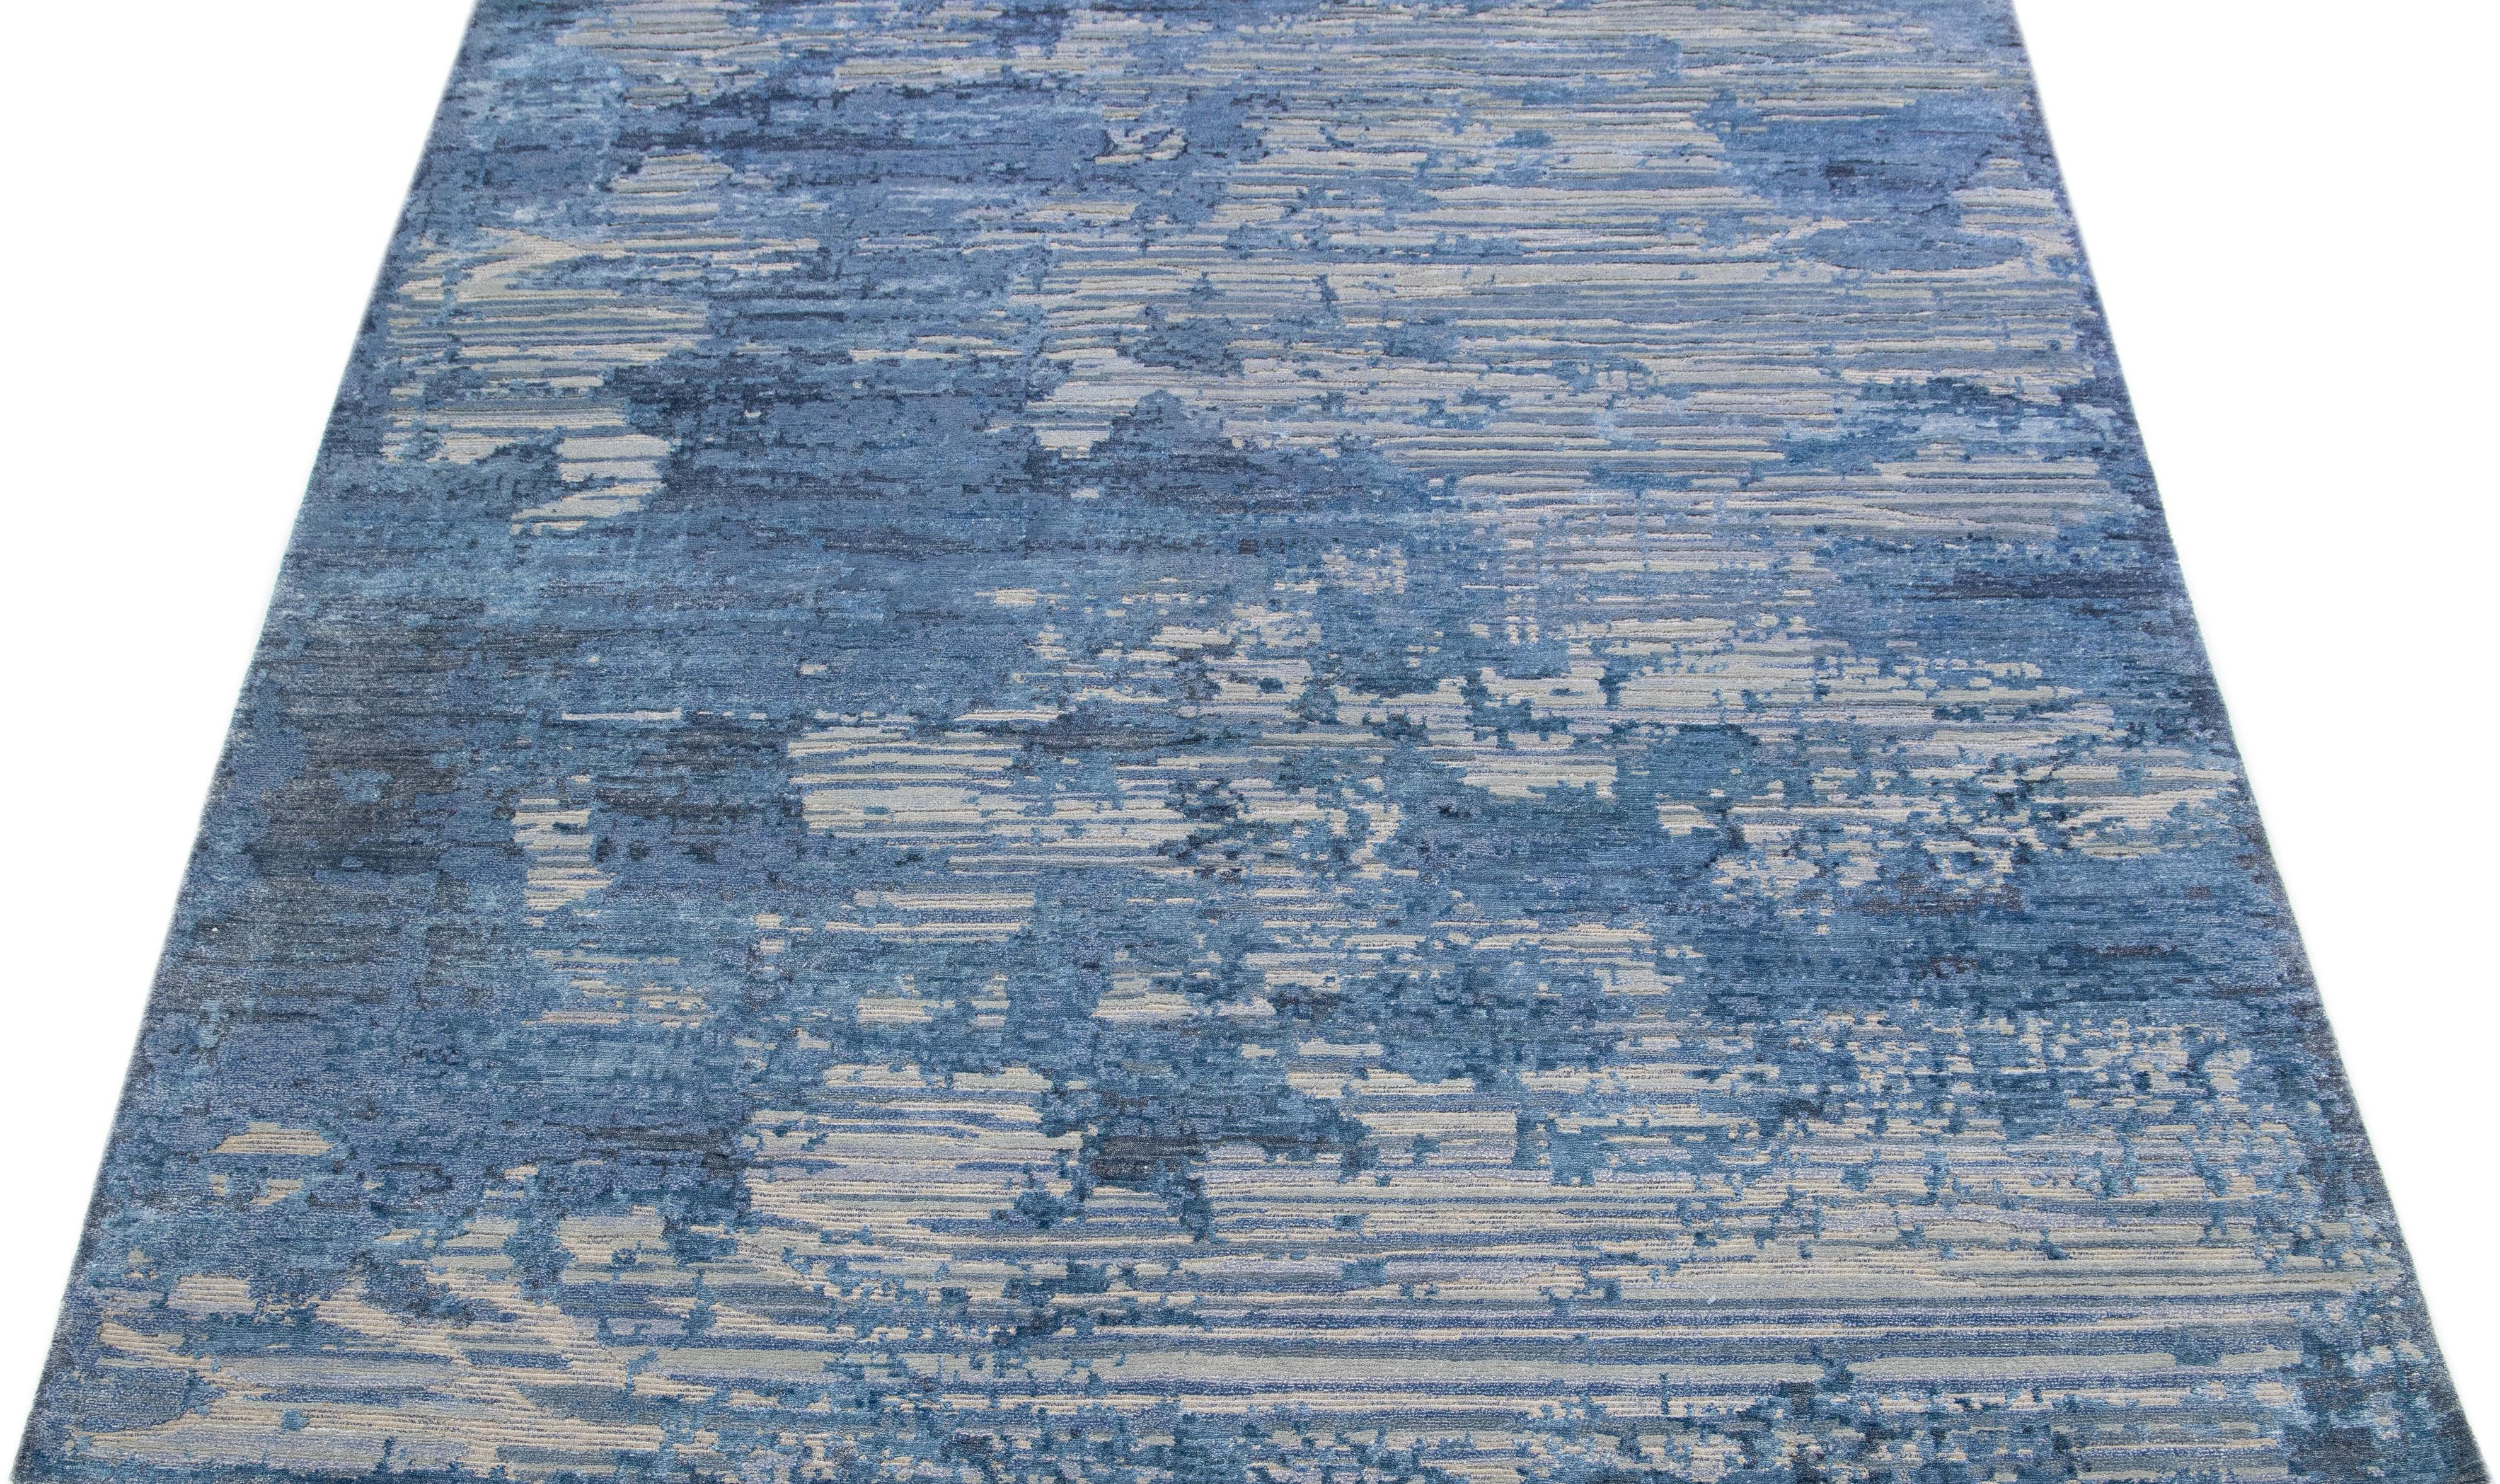 This Indian wool and silk blend rug features a gray field with an abstract pattern detailing blue satin. Its composed materials provide robustness and longevity, while its ornamental design infuses any room with sophistication.

This rug measures